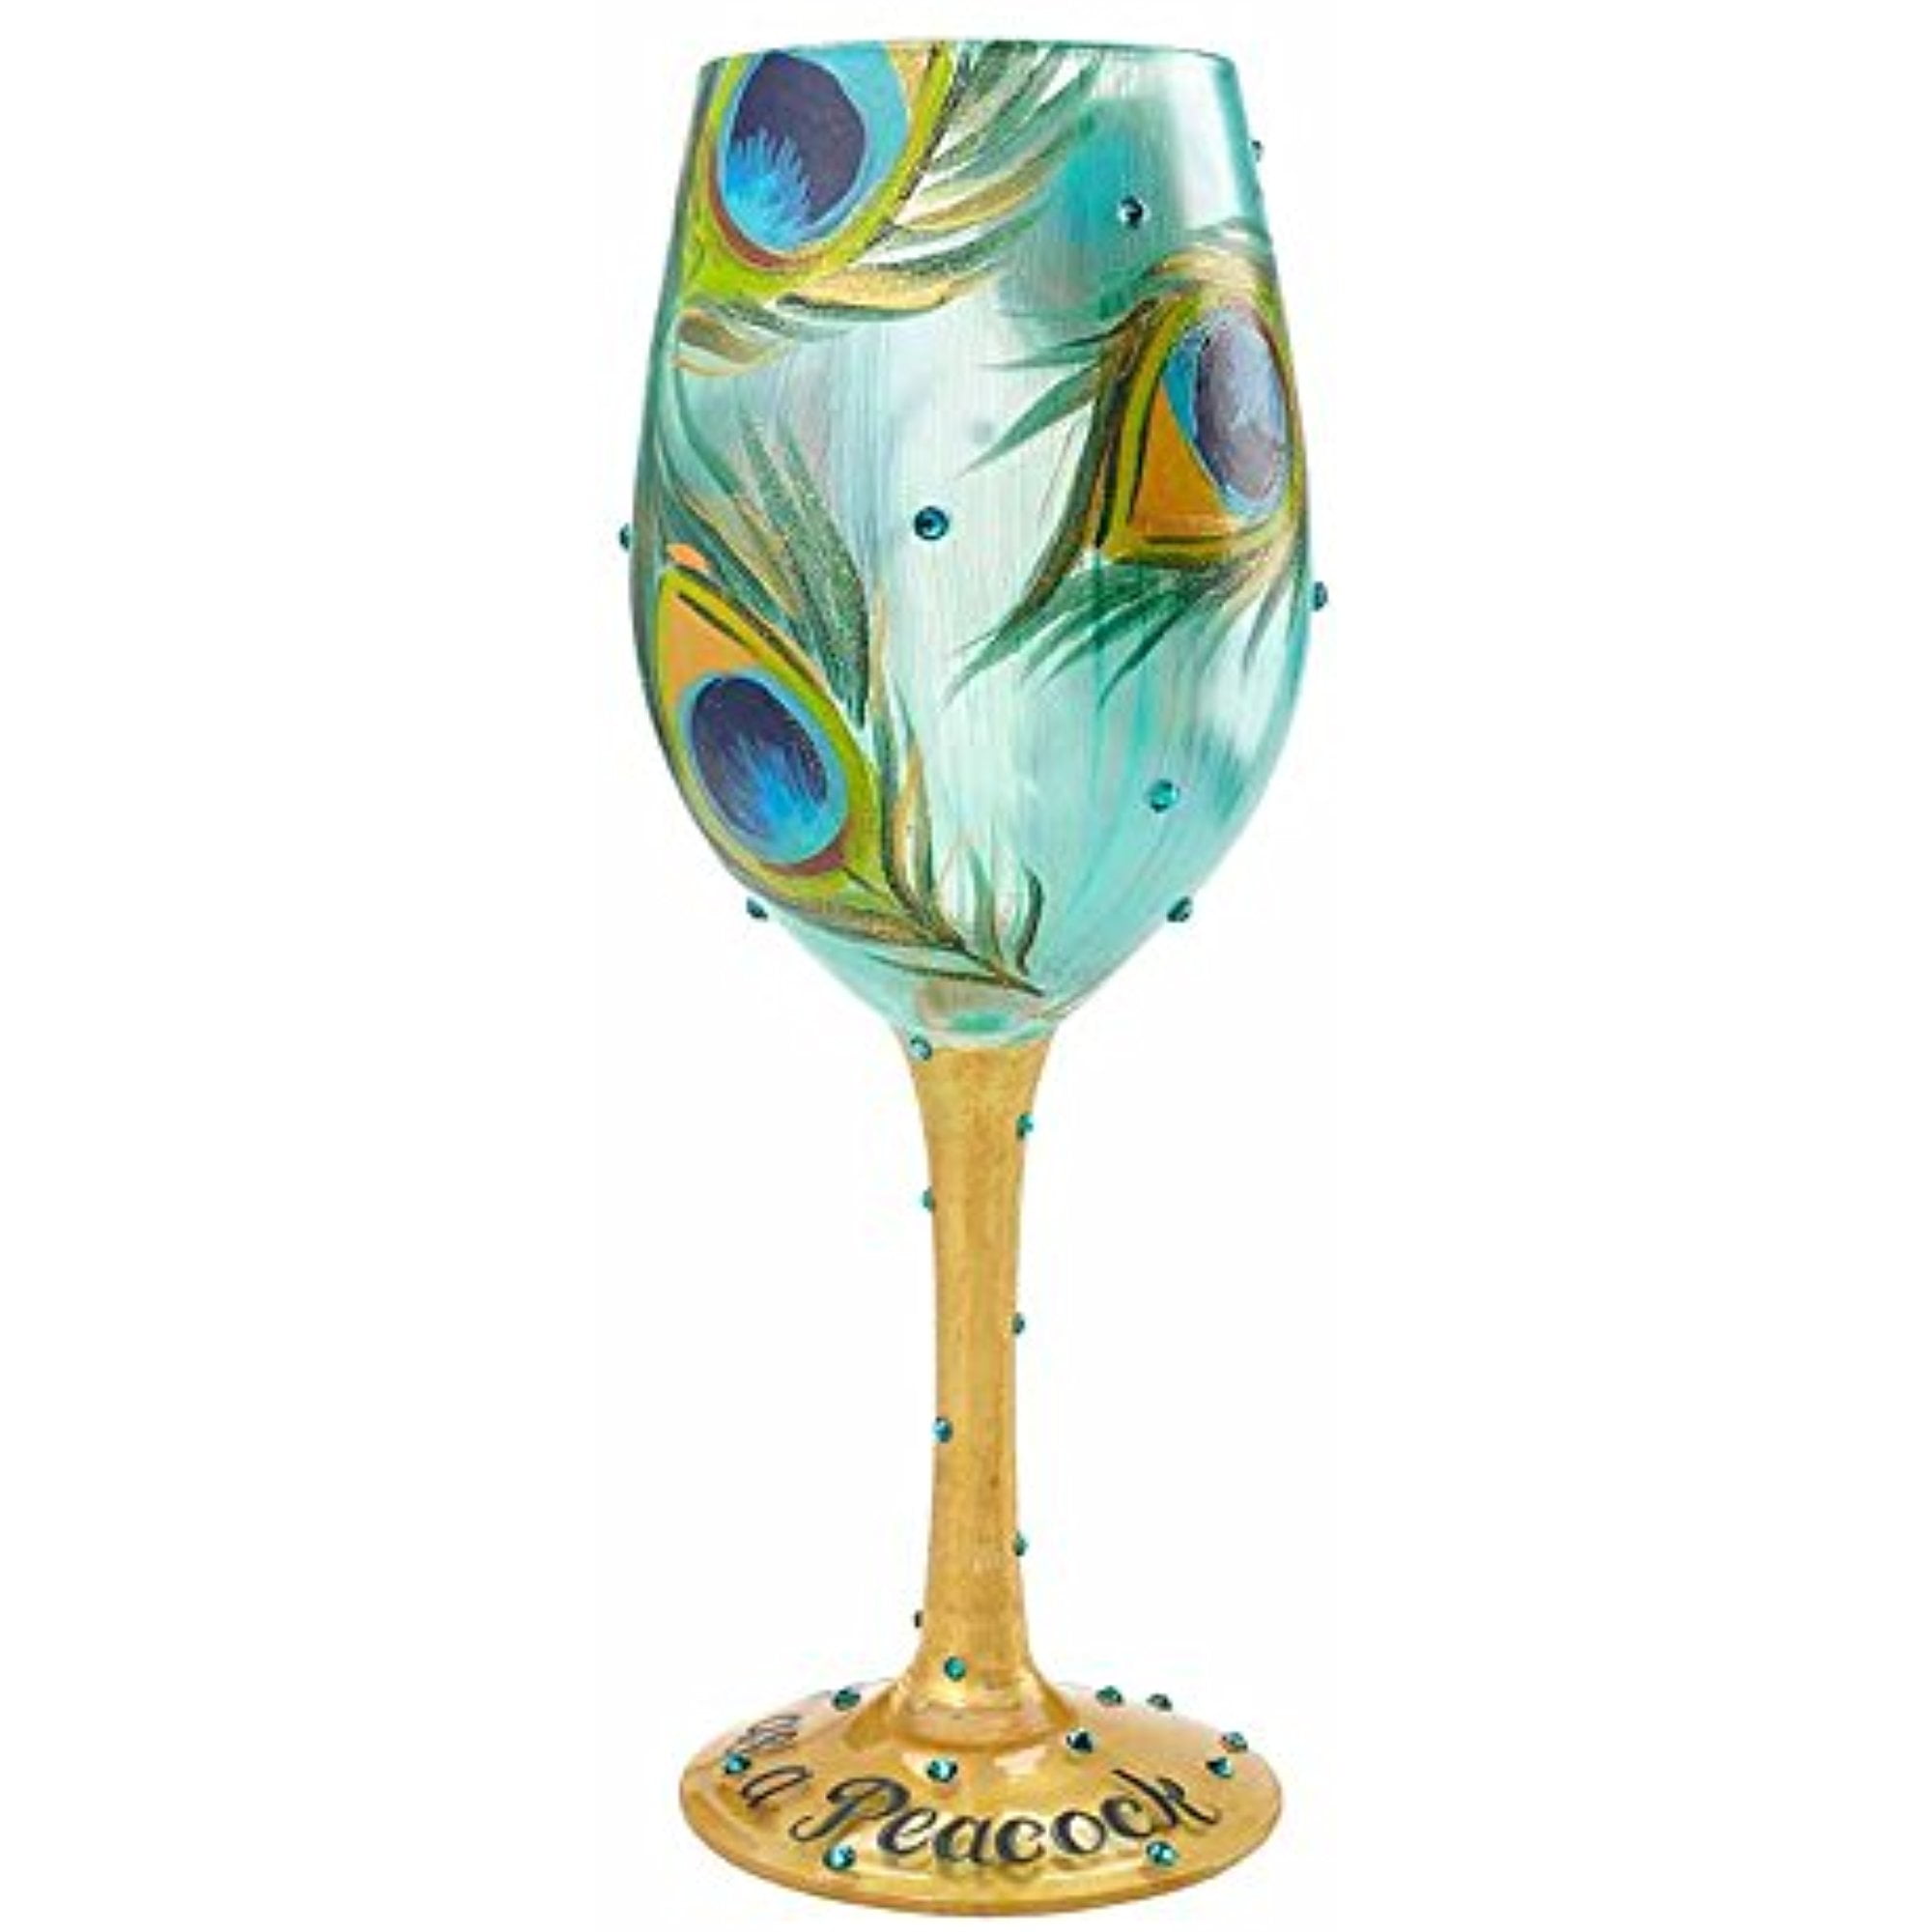 Enesco Designs by Lolita Best Mom Ever Hand-Painted Artisan Wine Glass 15 Ounce 